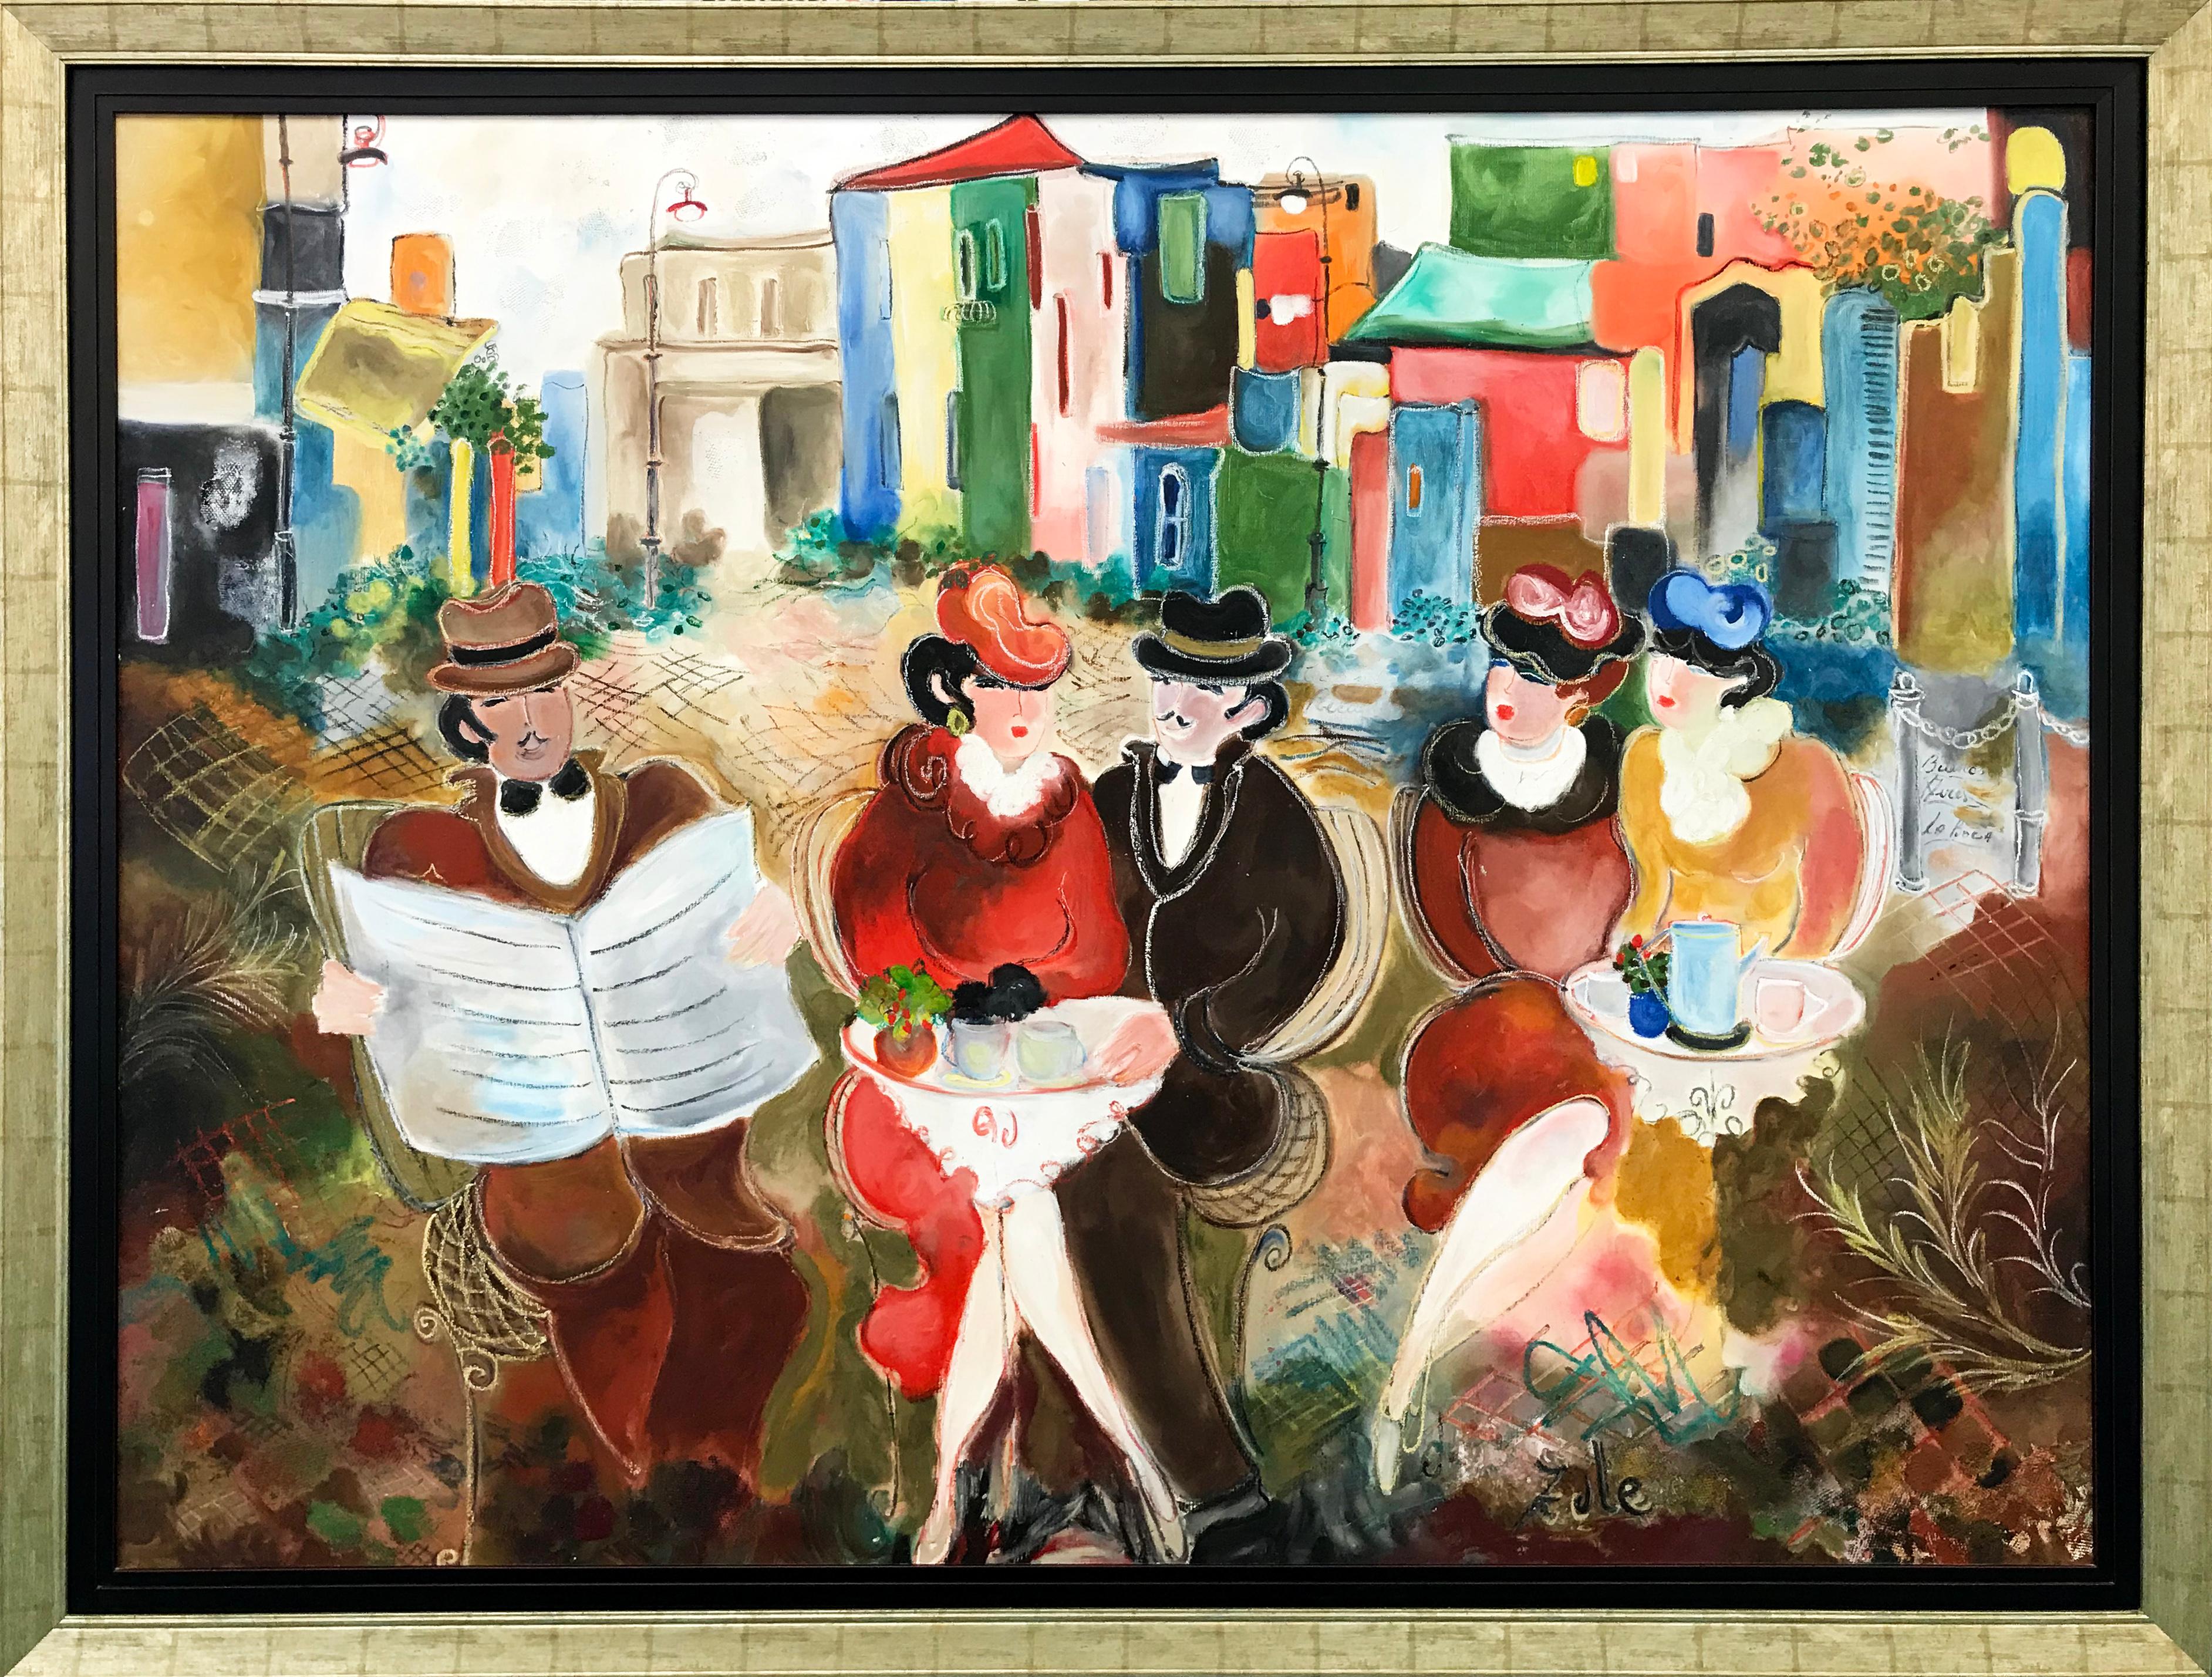 BUENOS AIRES - Print by Zule Moskowitz